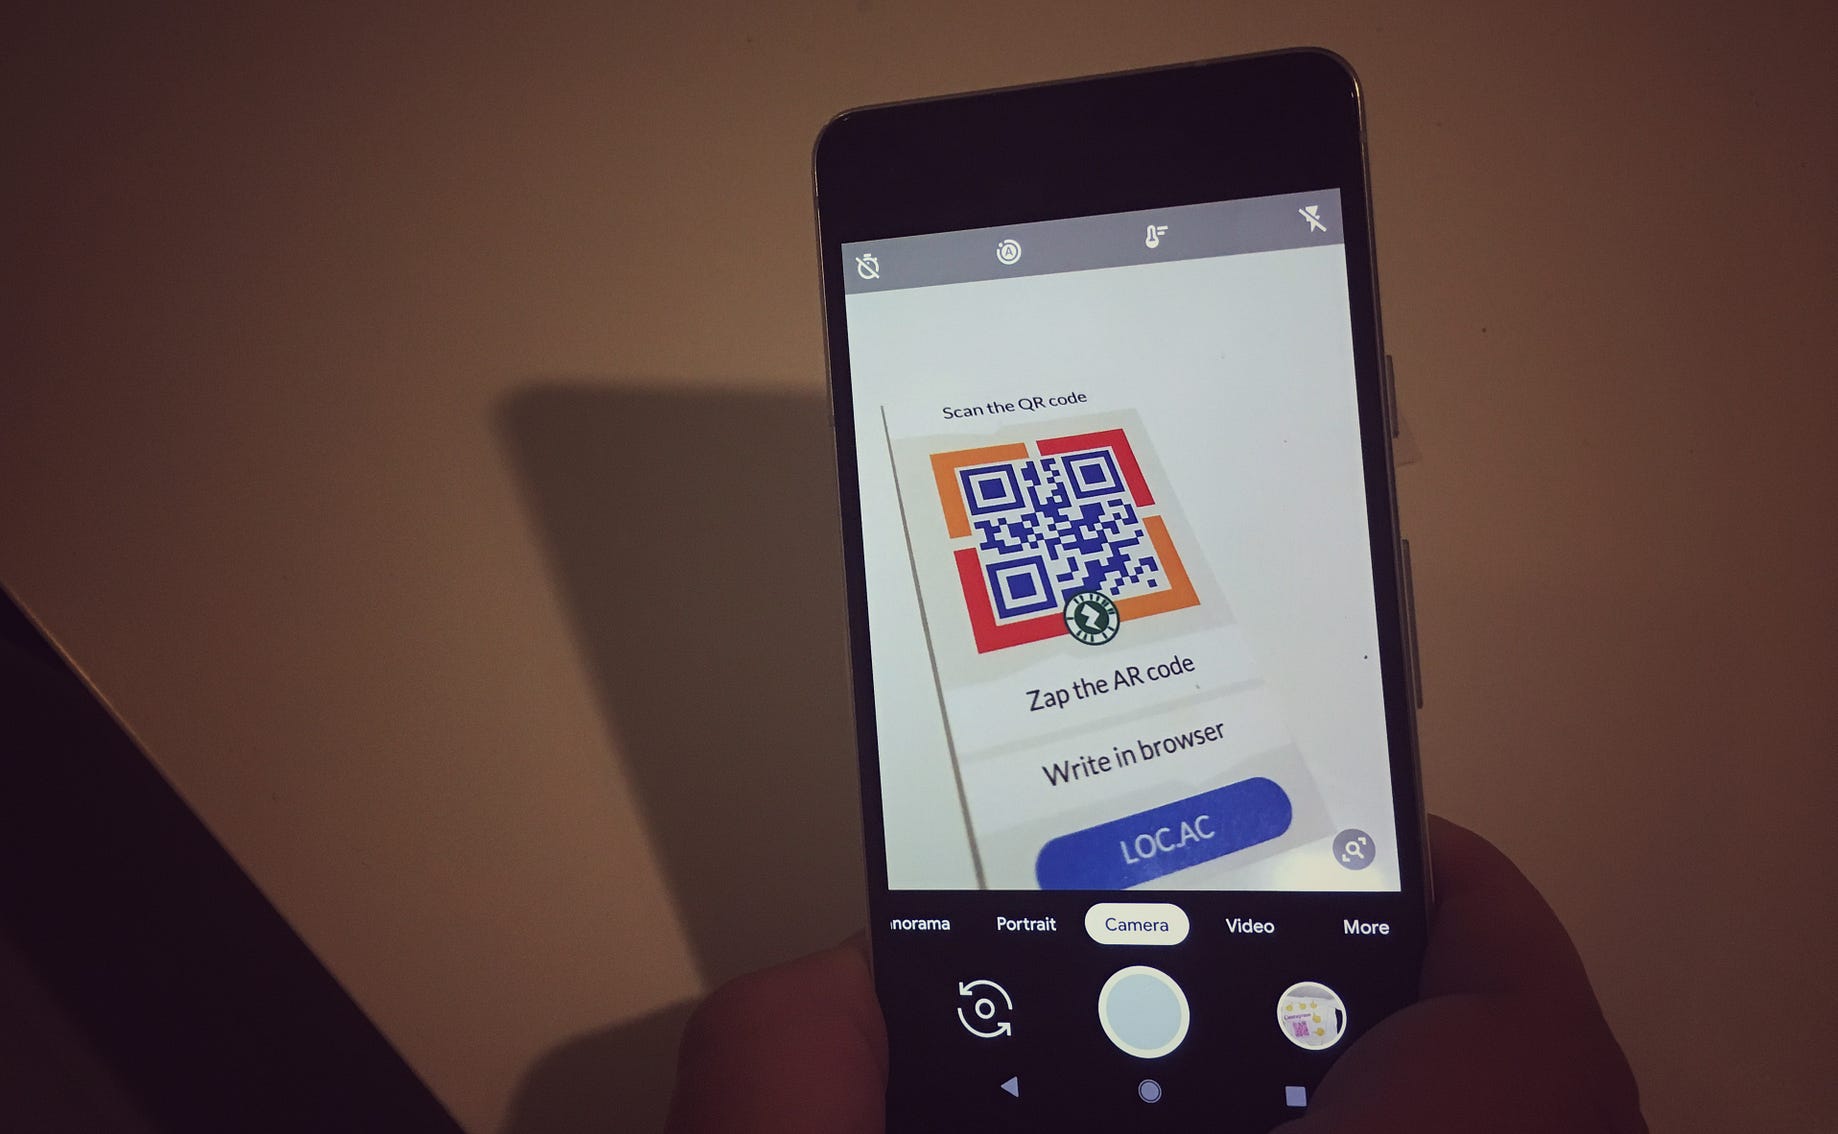 Built-in QR reader on Android. There is an built-in QR code scanner on… |  by Jyri Turunen | Turunen.mobi | Medium